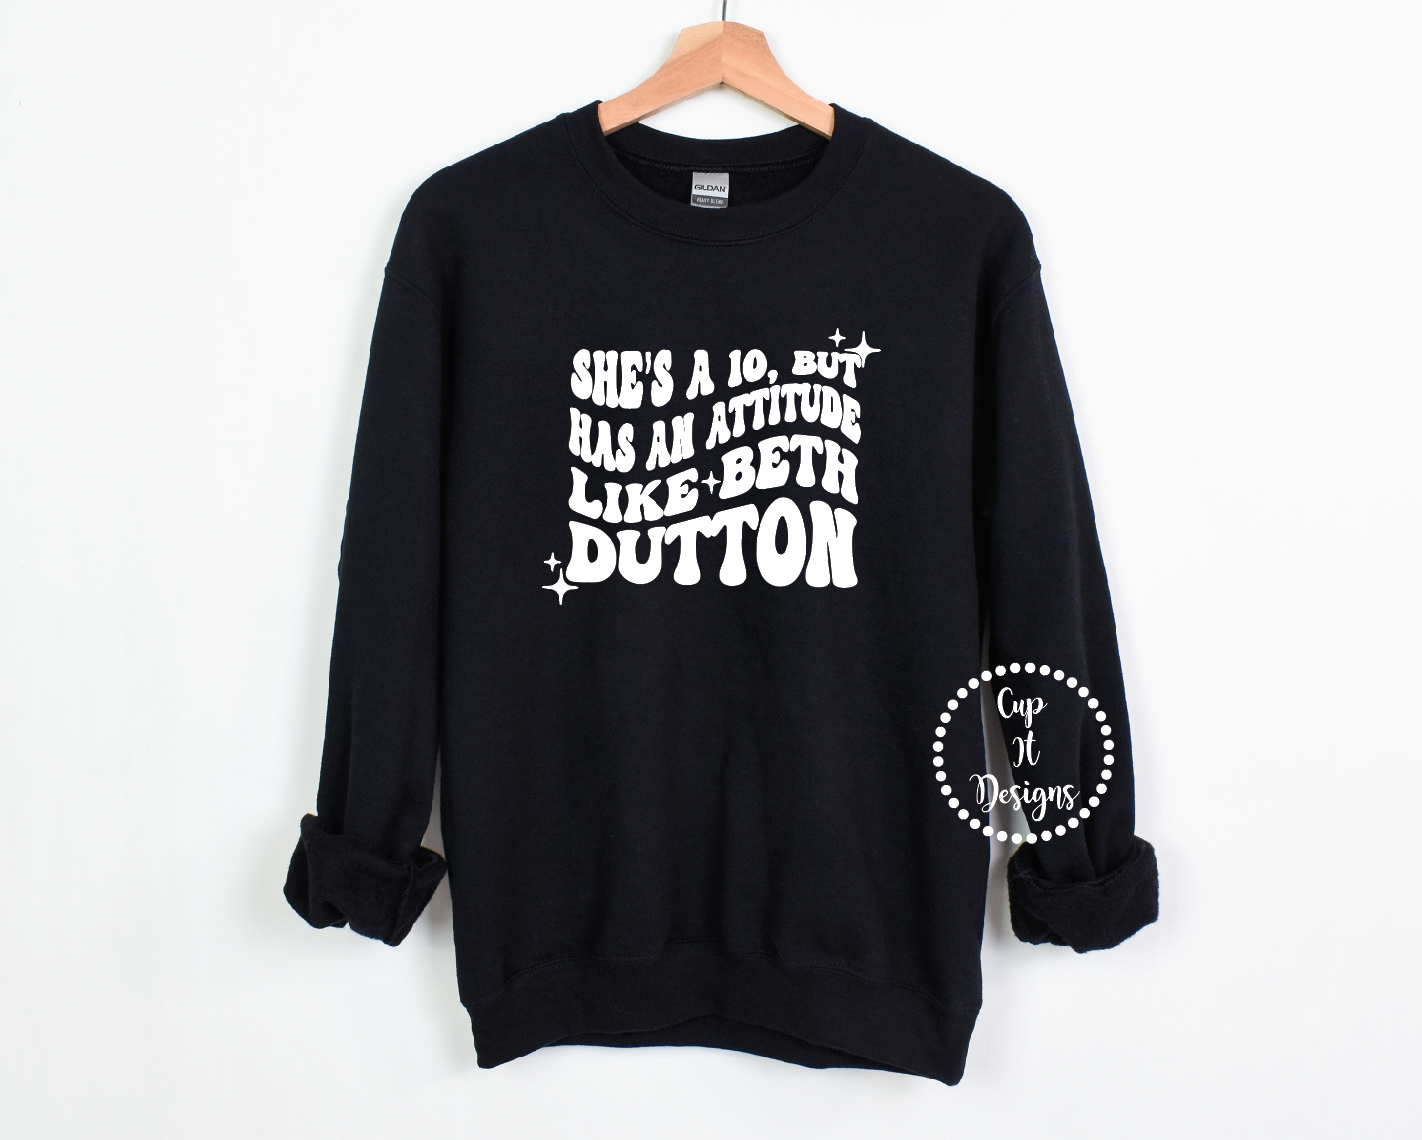 She’s a 10 but Has An Attitude Like Beth DuttonCrewneck